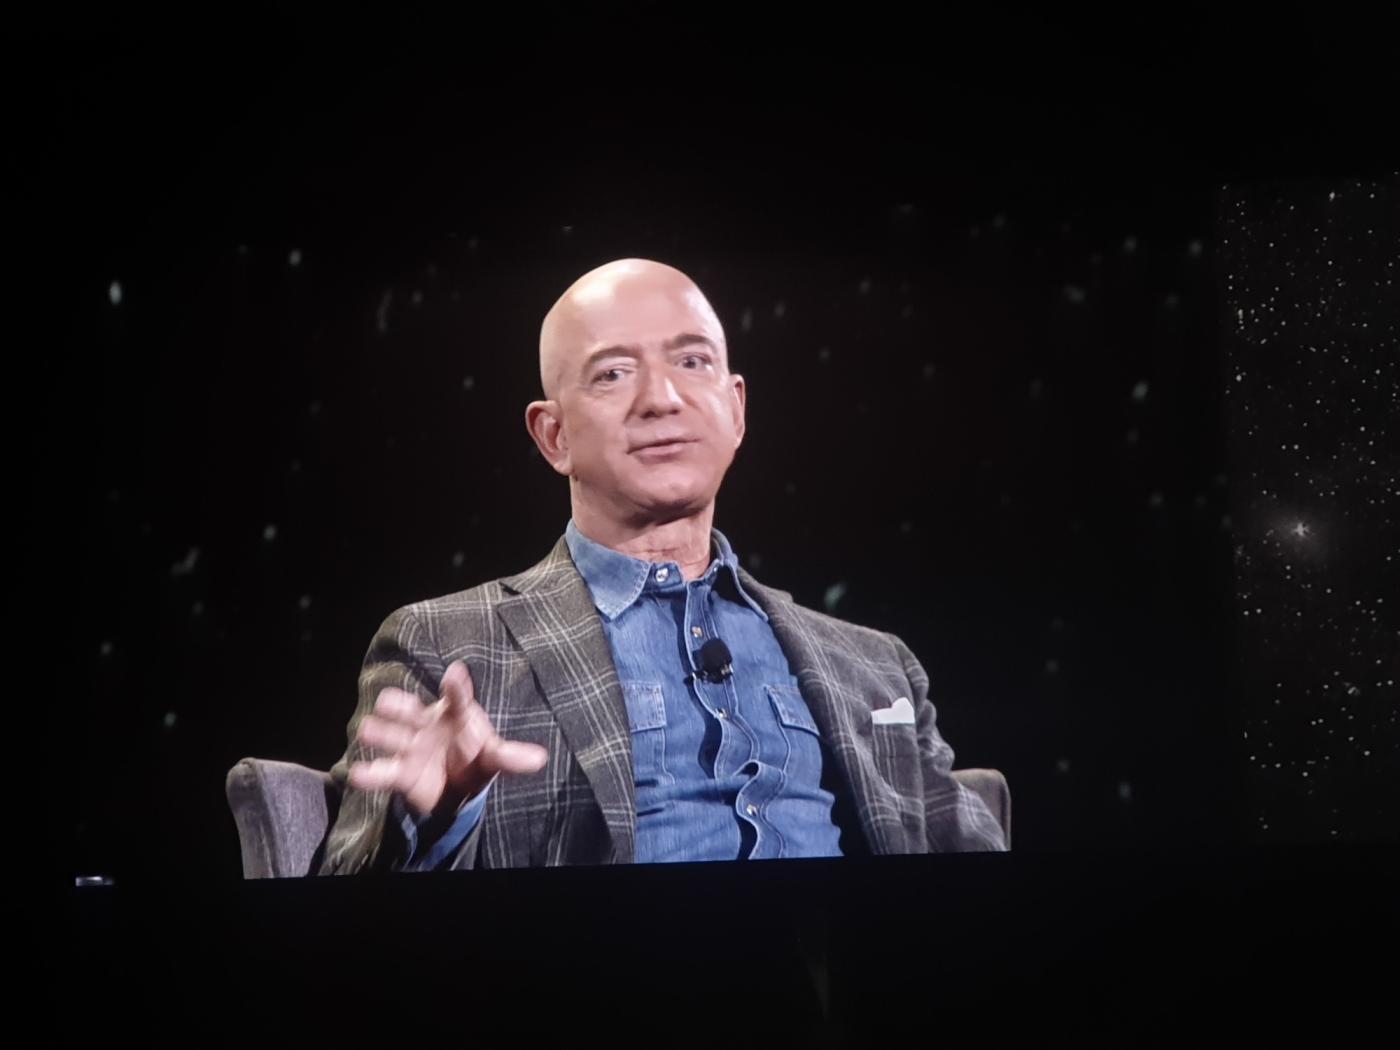 Las Vegas: Jeff Bezos during on-stage talk at Amazon re: Mars conference in Las Vegas on June 6, 2019. (Photos: IANS) by .